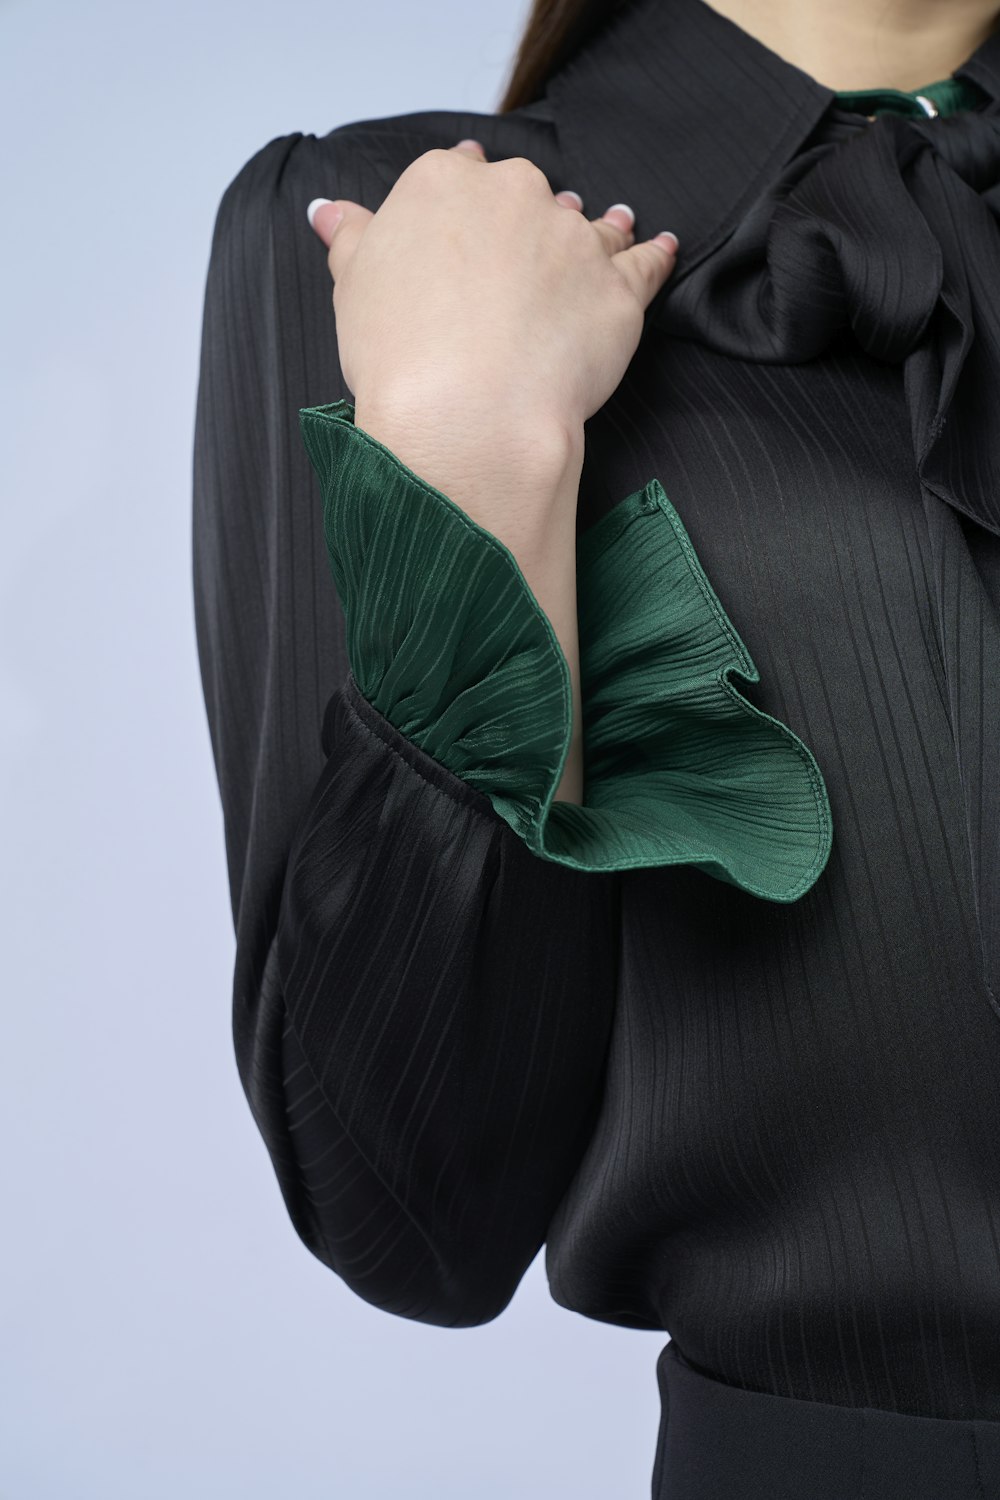 a woman wearing a black shirt with a green bow